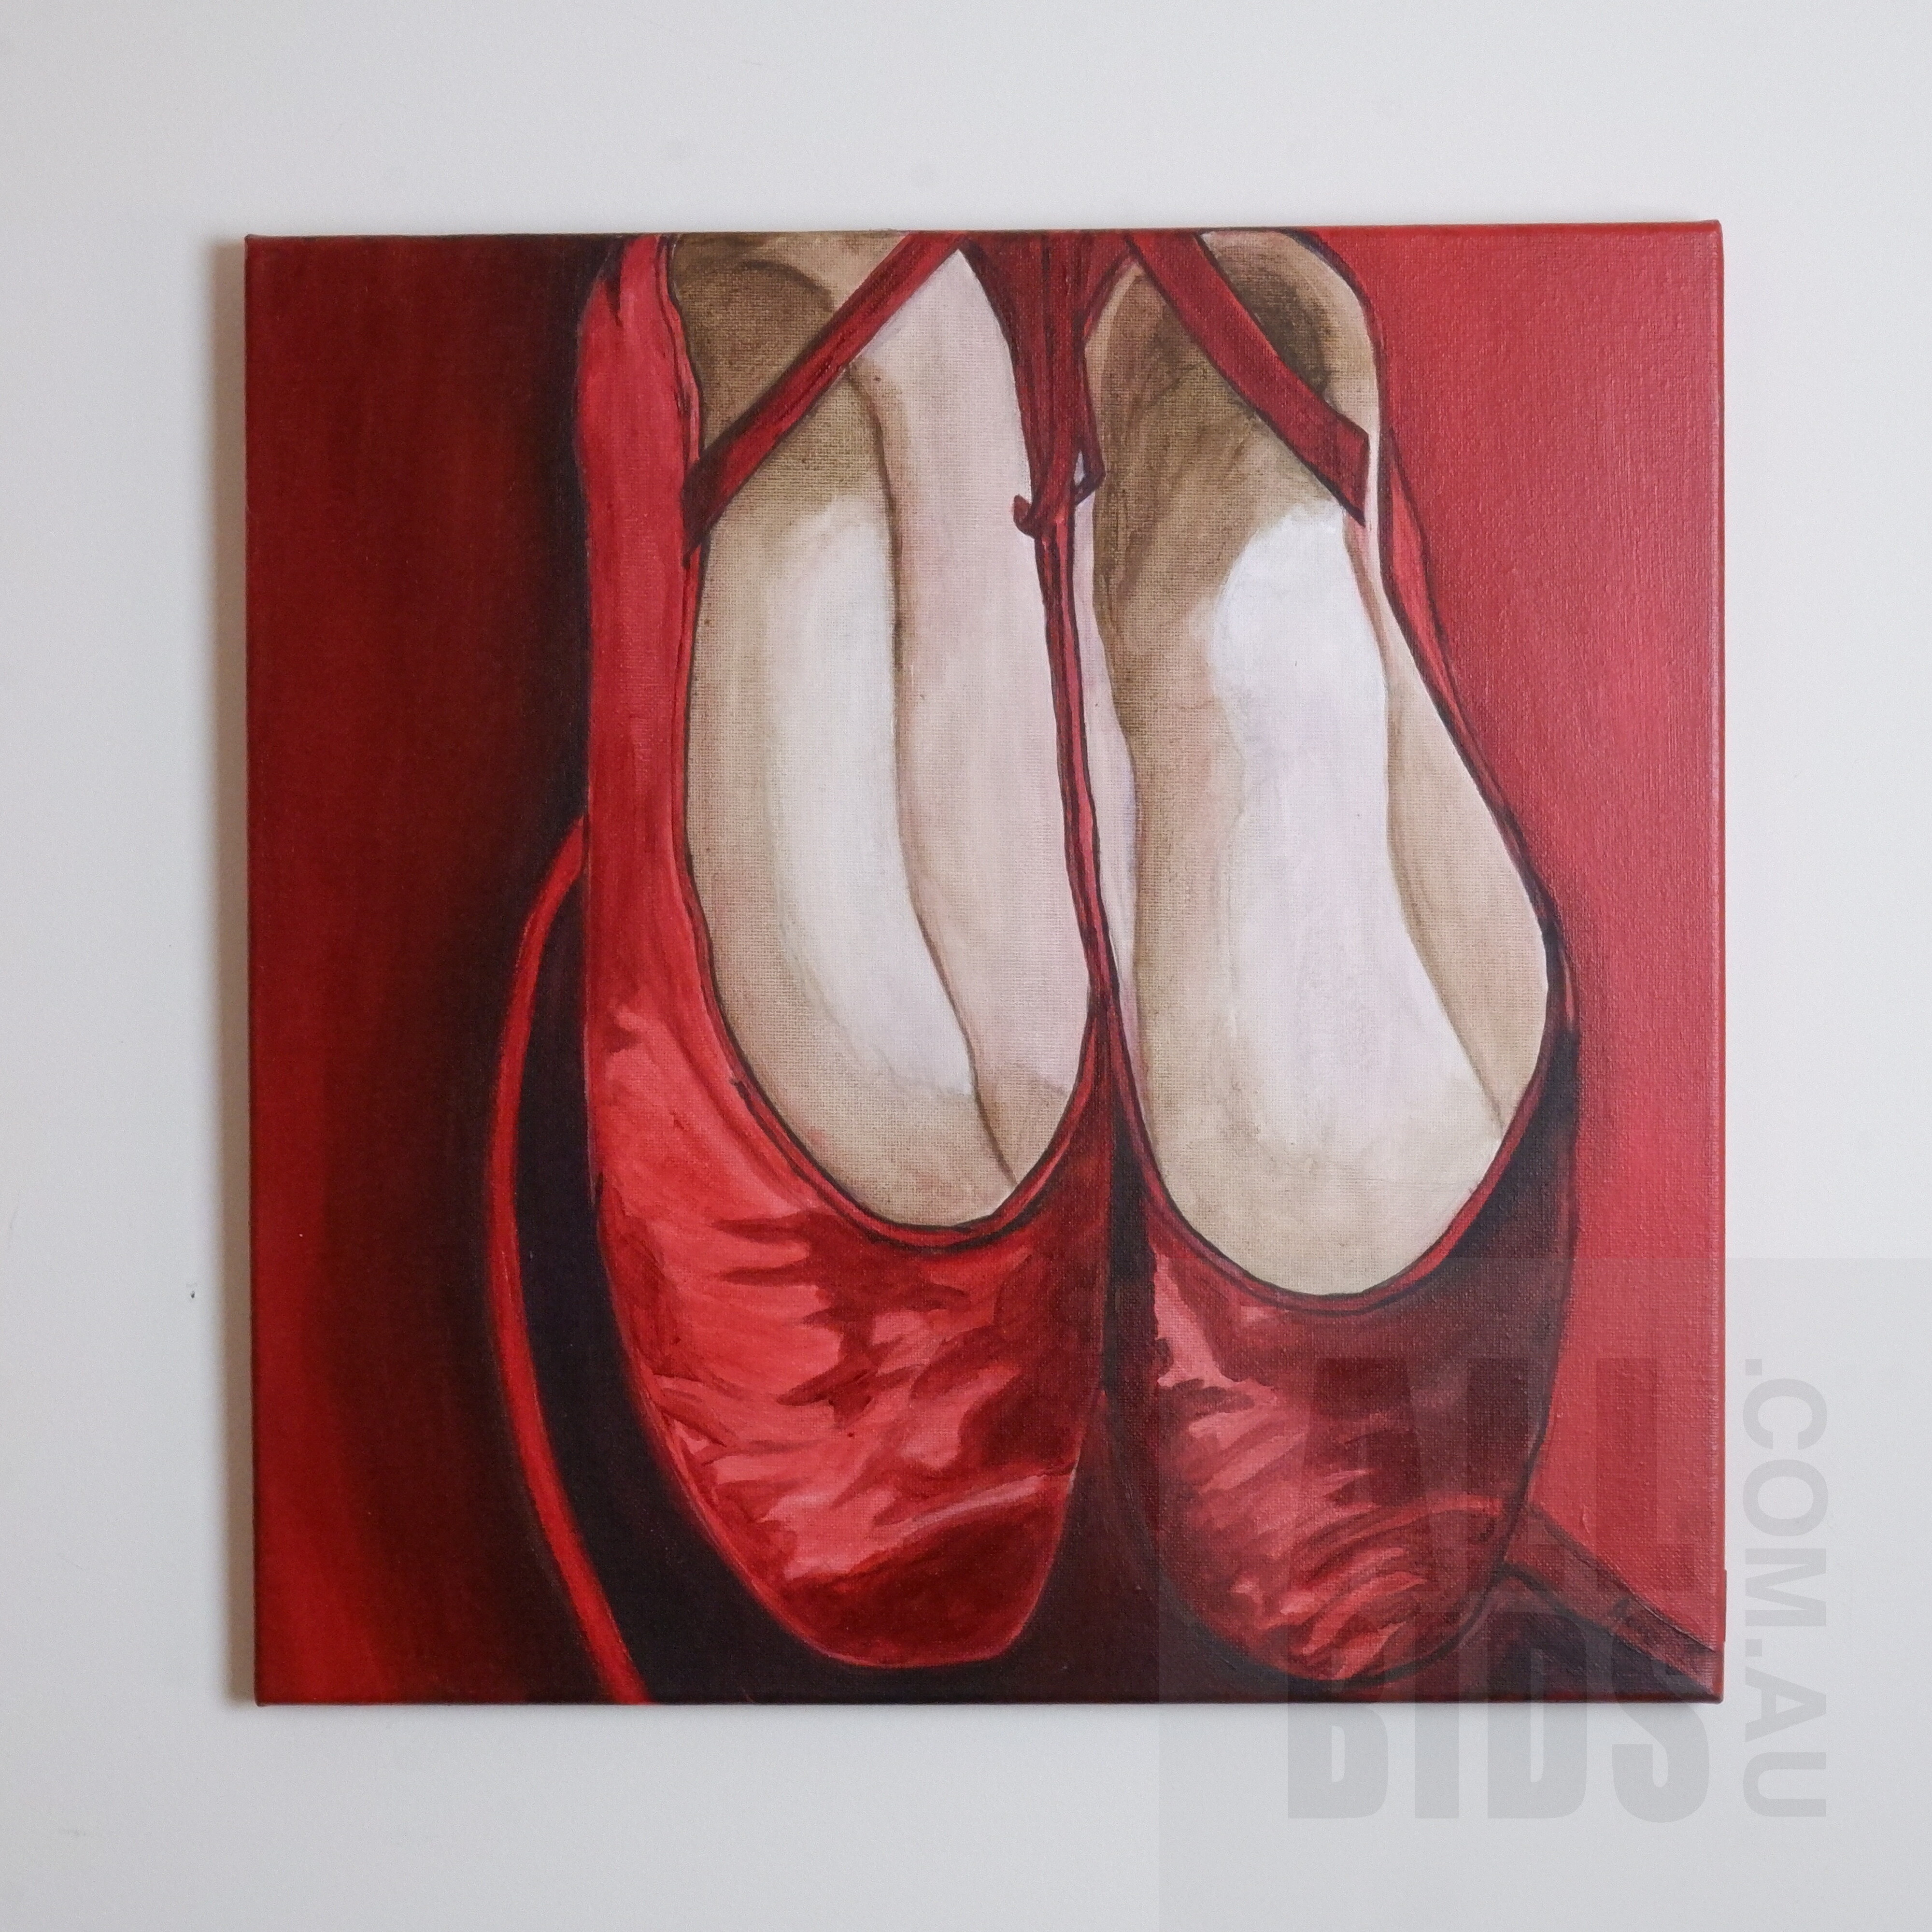 'Jacqui R., Red Shoes, Acrylic on Canvas, 45 x 45 cm'